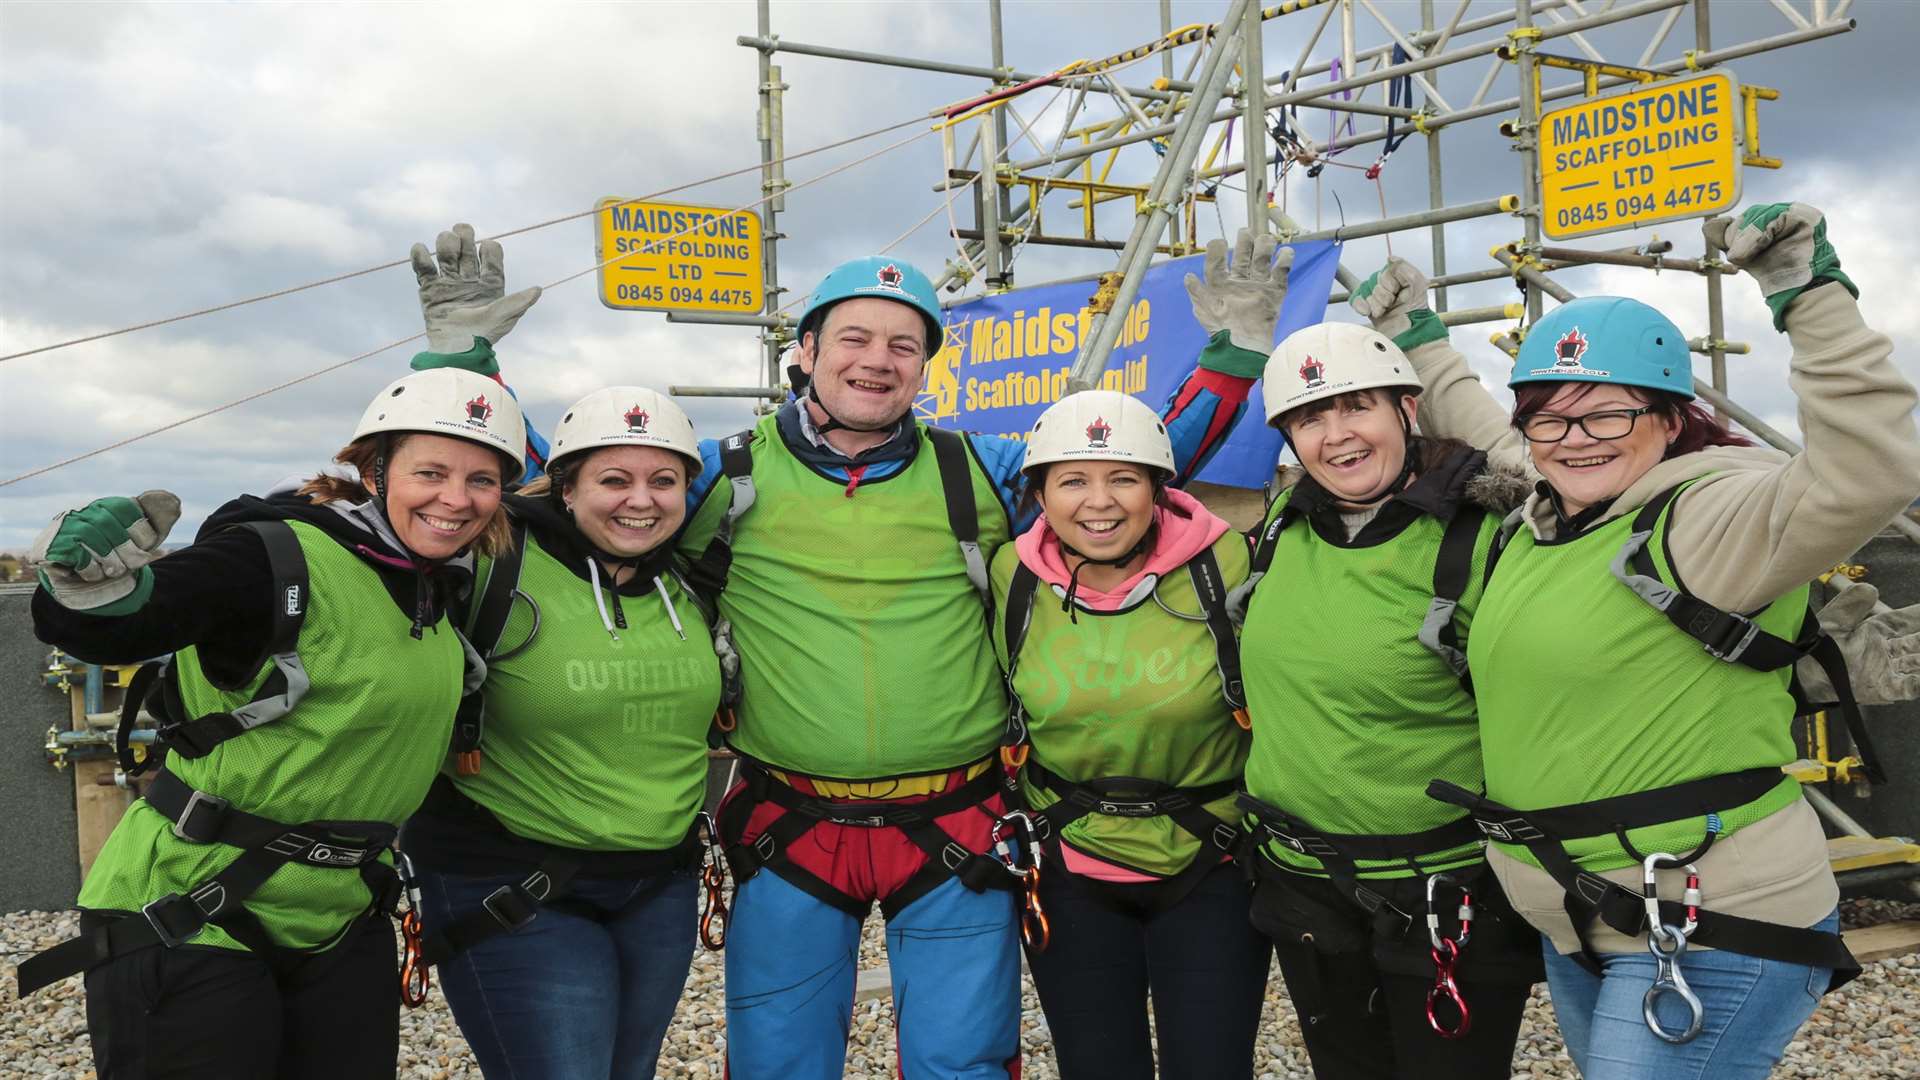 Participants from Dartford, Gravesham, Medway and Maidstone at this year's charity abseil